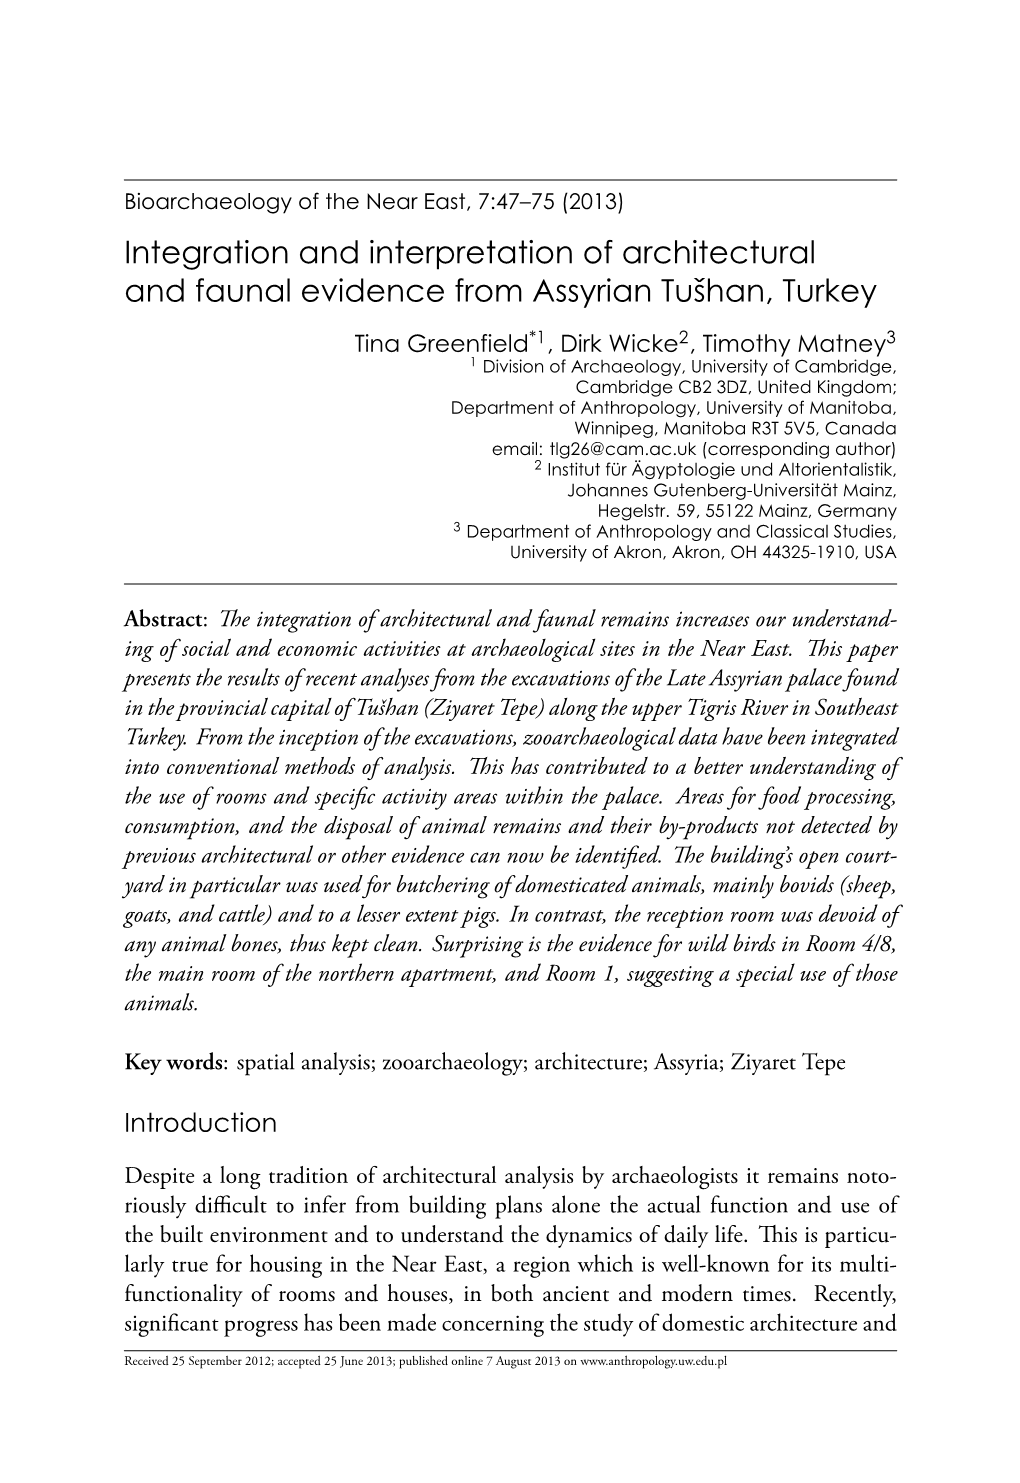 Integration and Interpretation of Architectural and Faunal Evidence from Assyrian Tushhan, Turkey